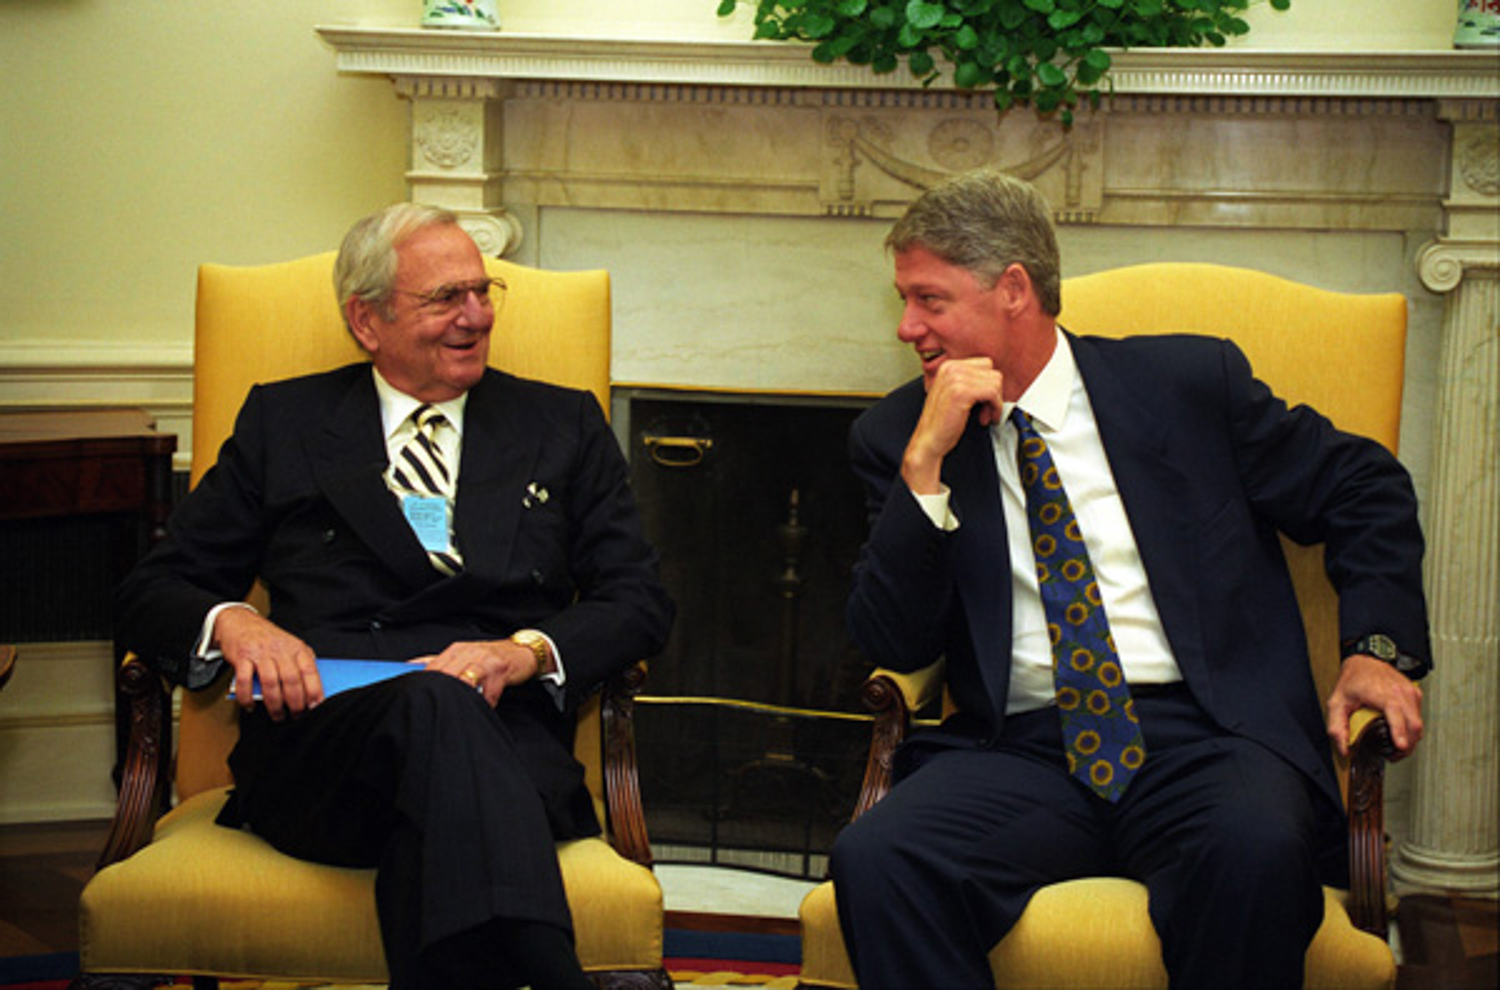 Lee Iacocca with President Clinton in the White House. 